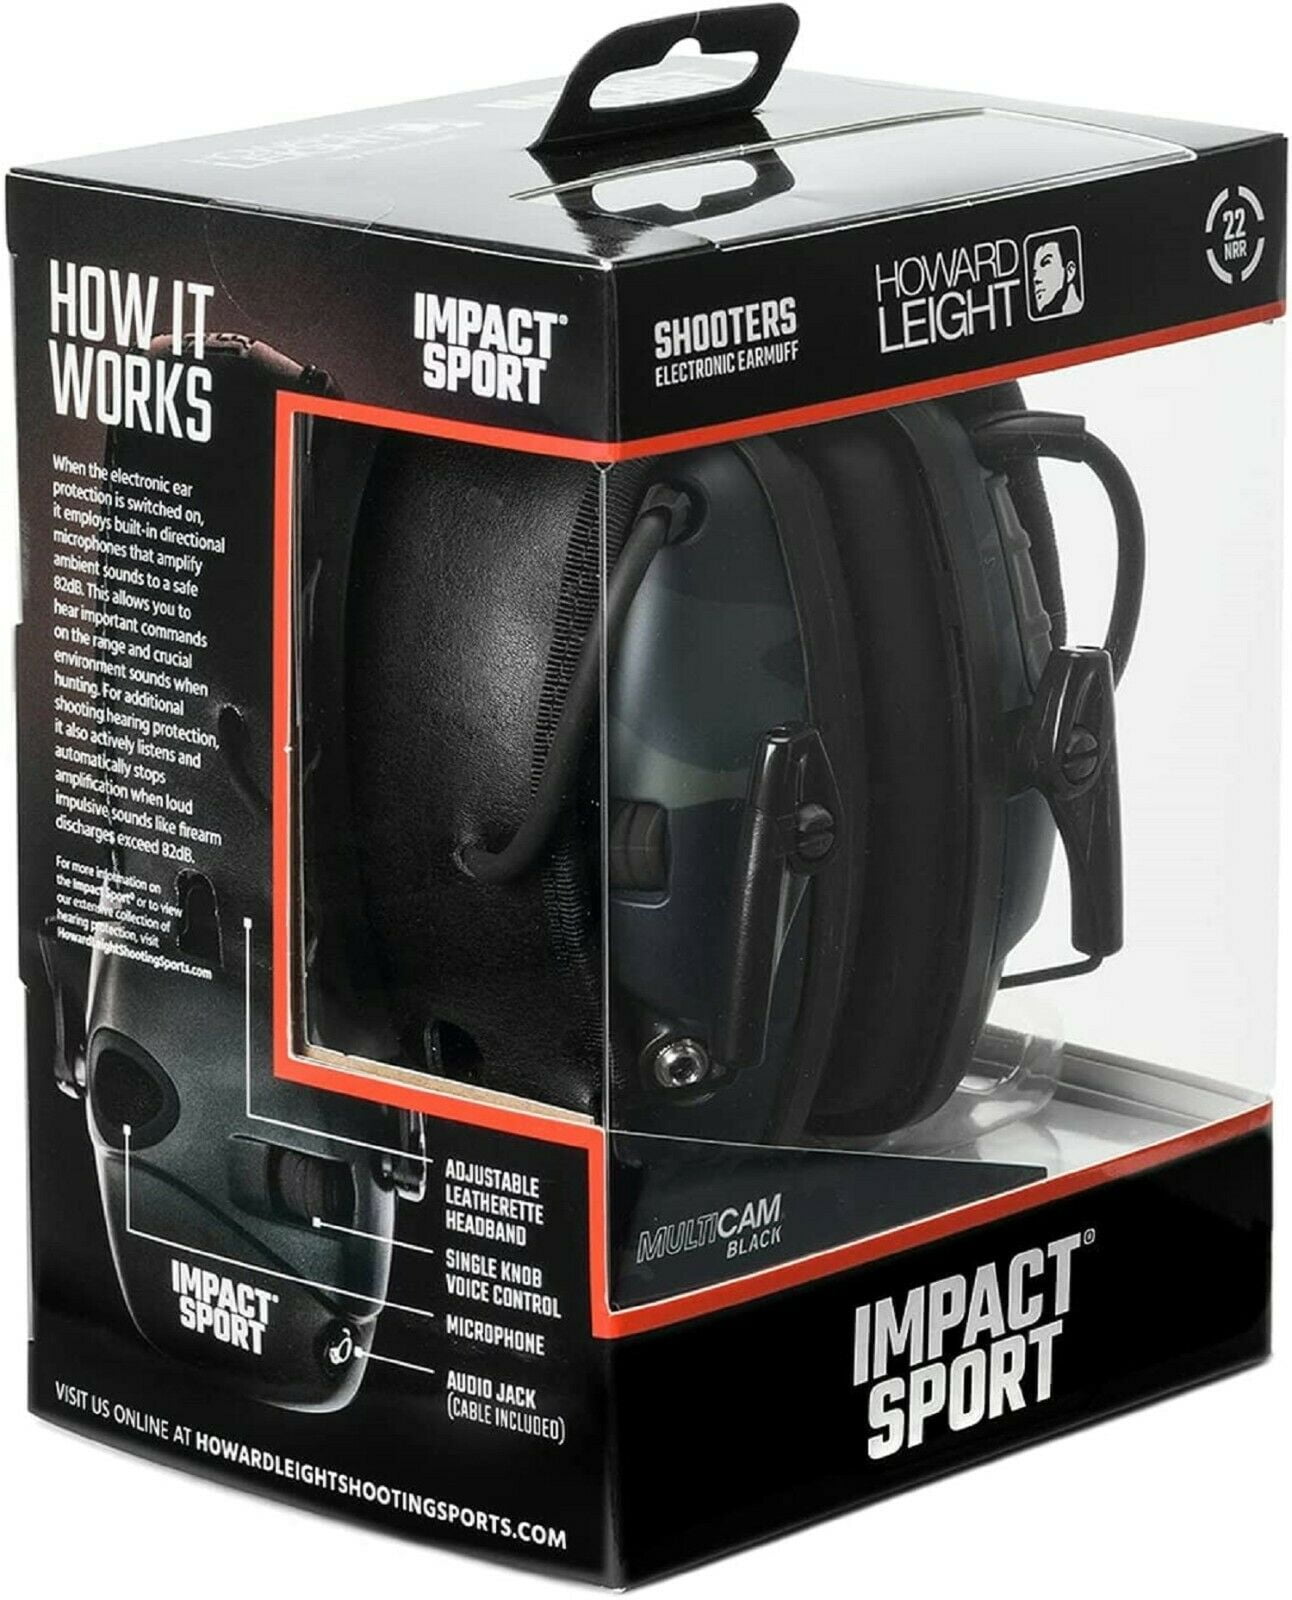 Howard Leight Impact Sport Electronic Ear Muff NRR 22 Classic OD Green 